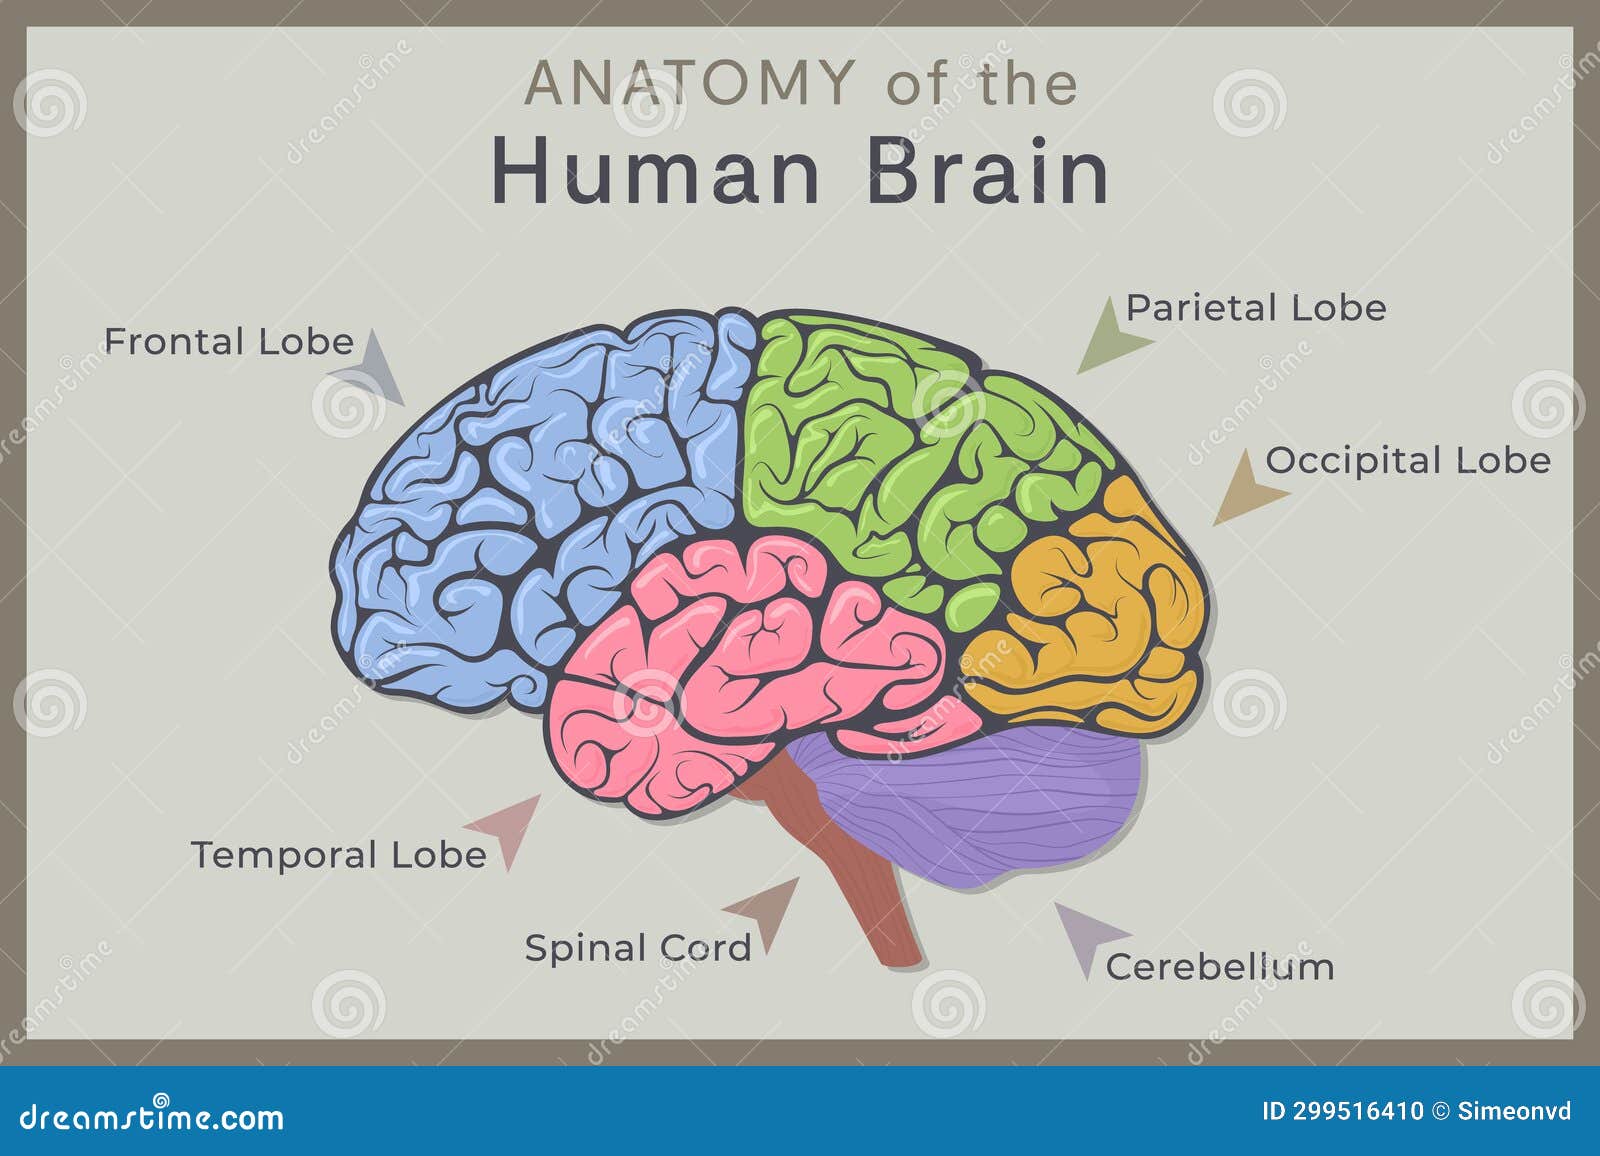 Anatomy of the Human Brain: Structure and Functions. Vector ...